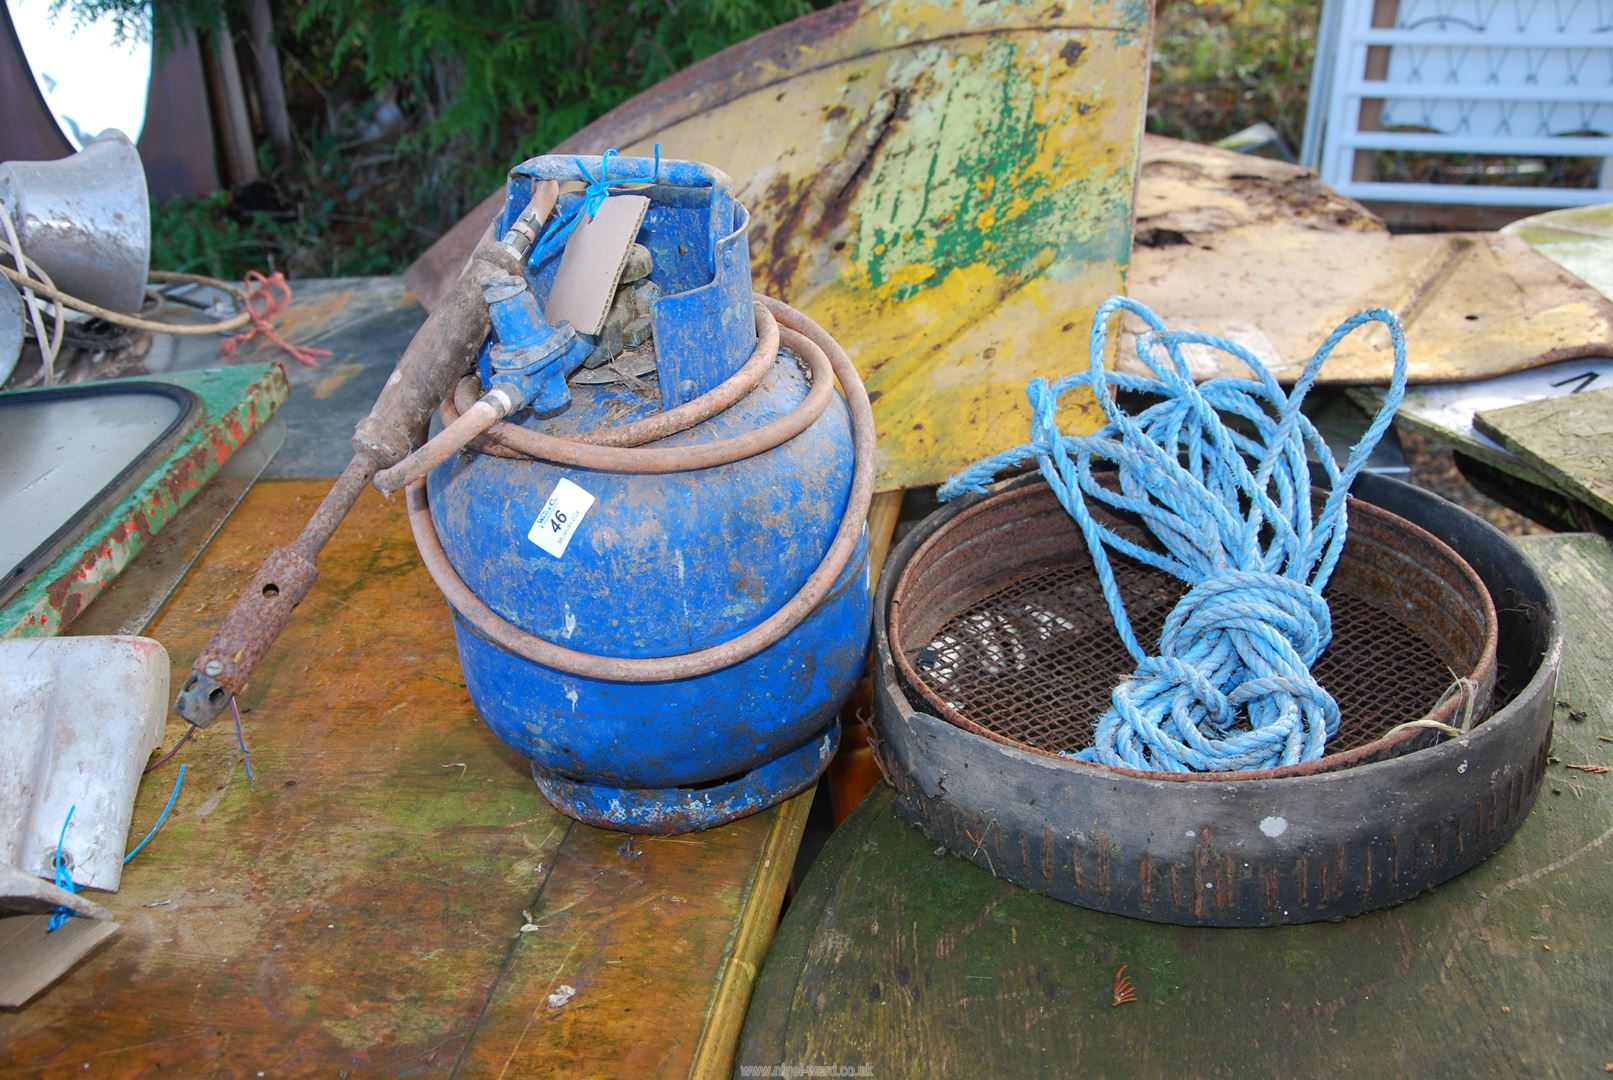 A de-horning kit with gas cylinder, two riddles and a nylon rope.